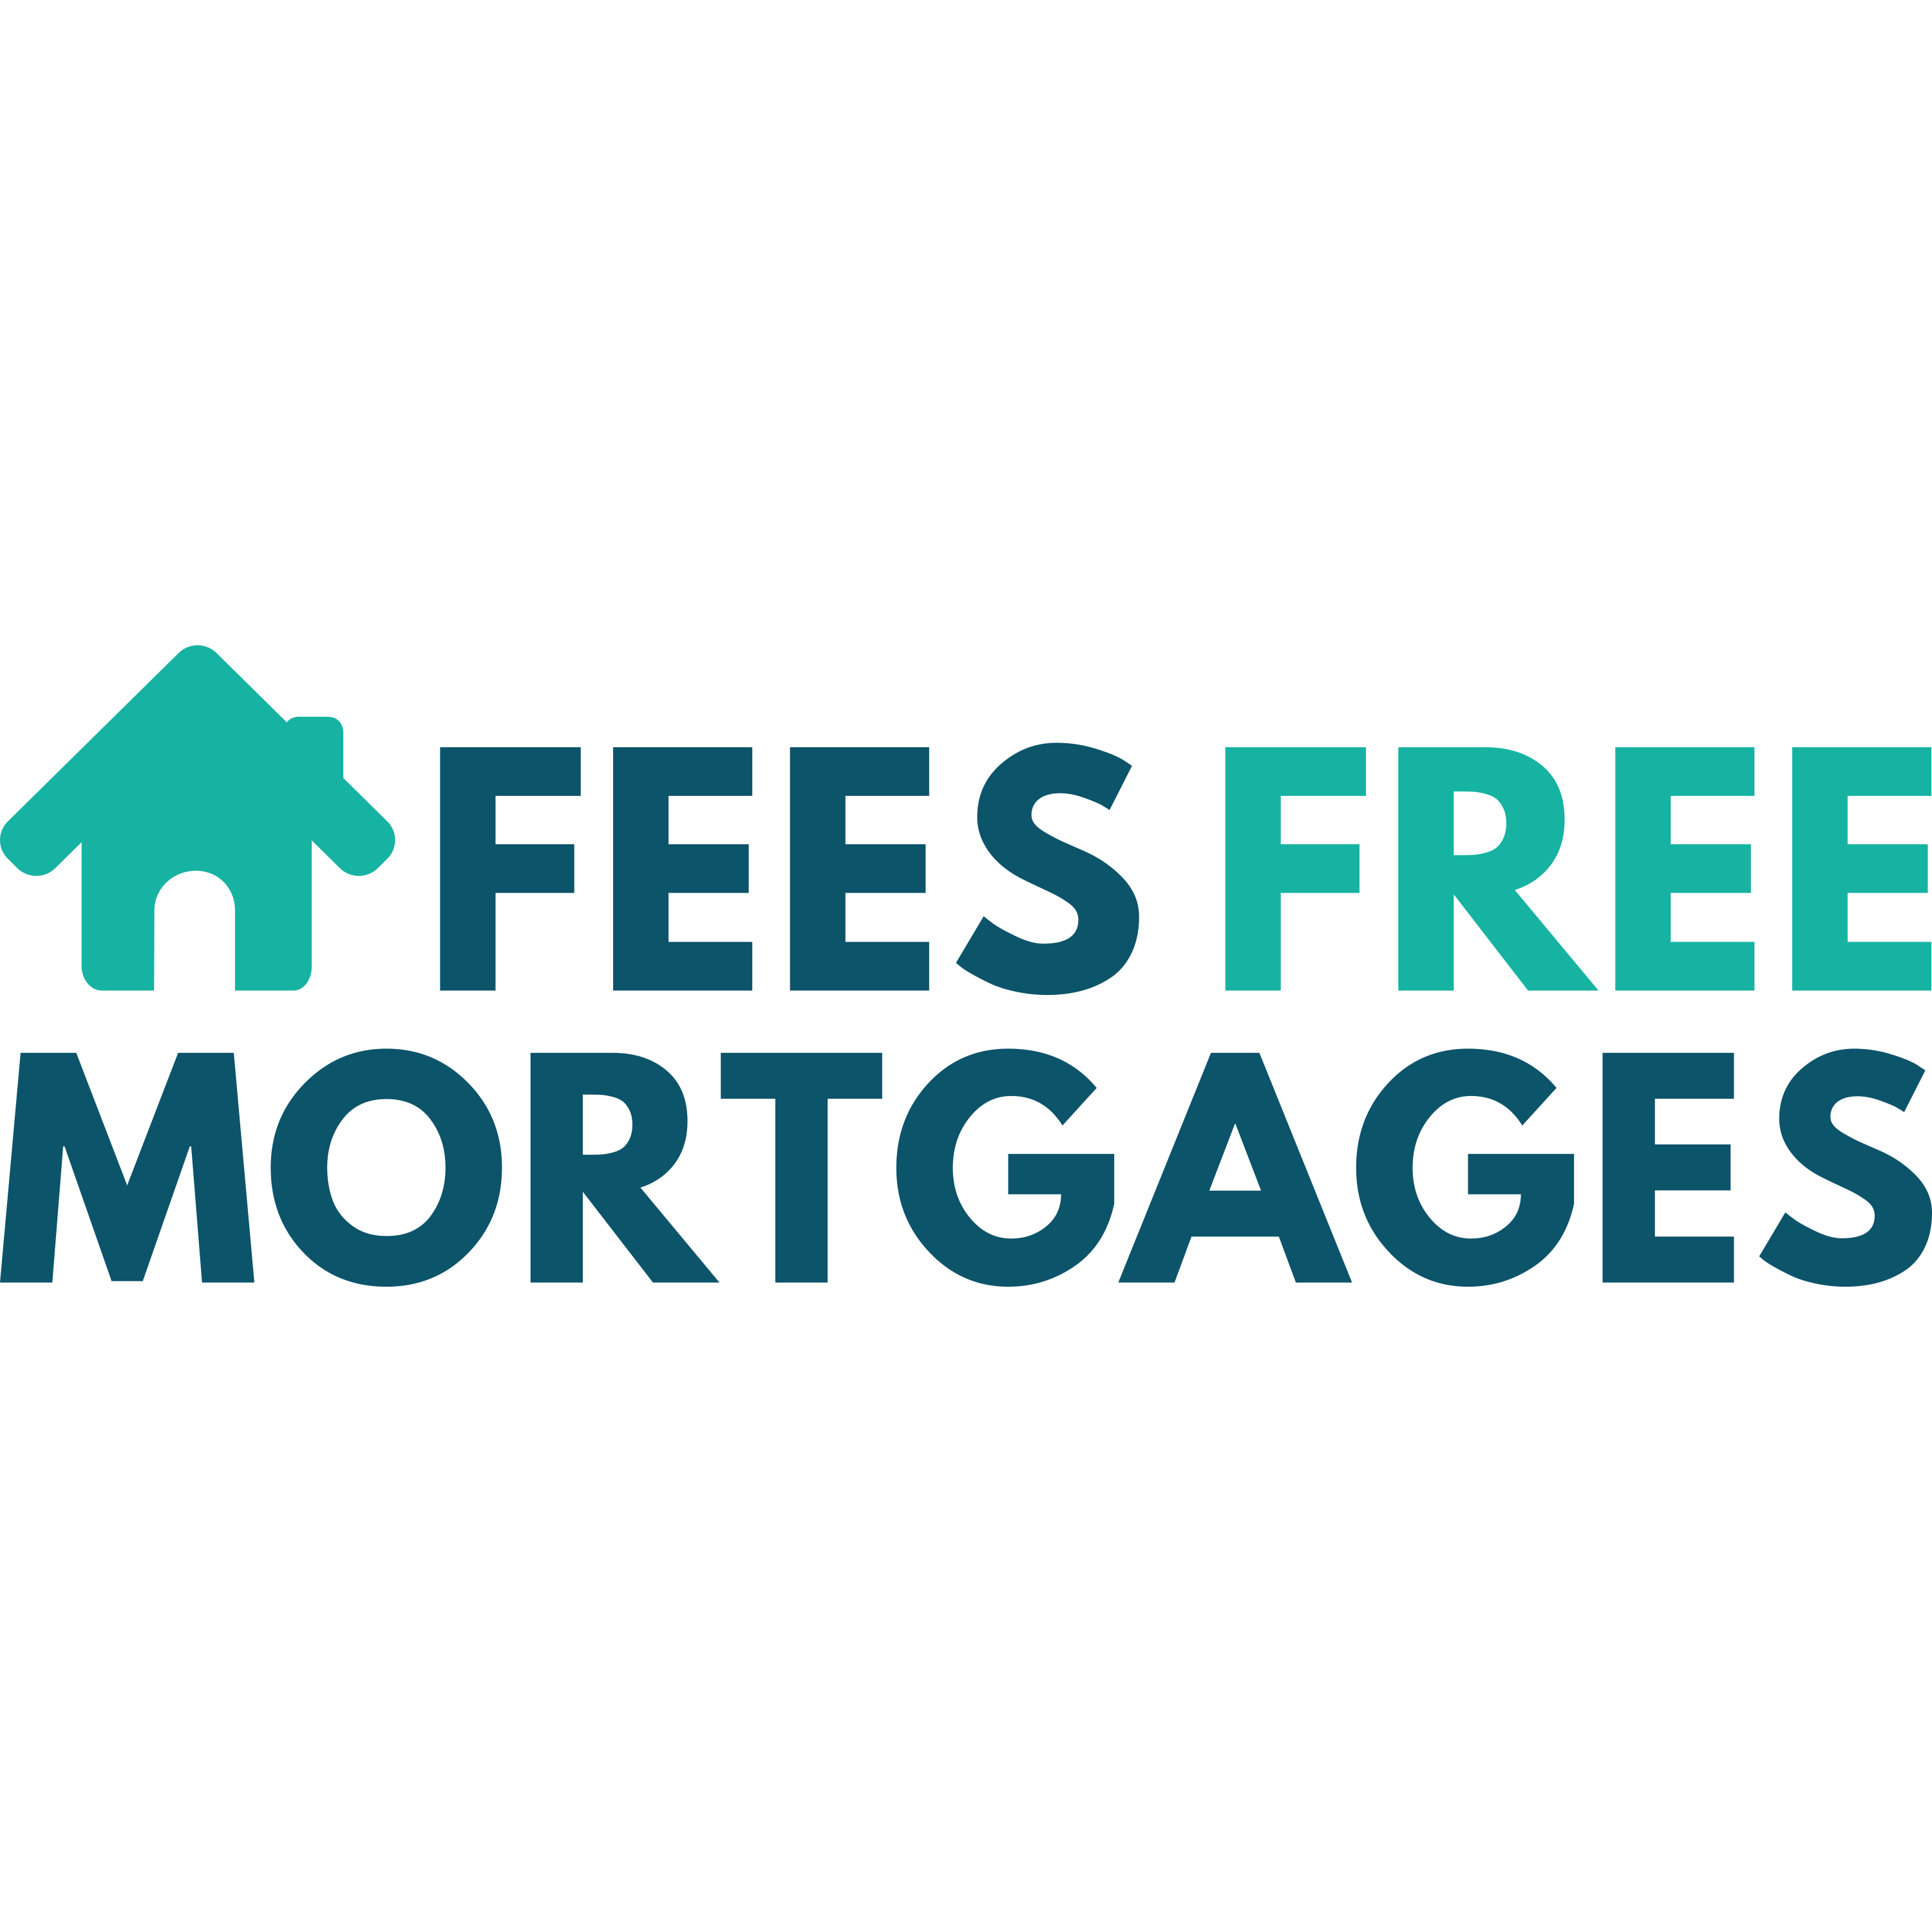 FEES FREE MORTGAGES FINAL LOGO lg copy.png